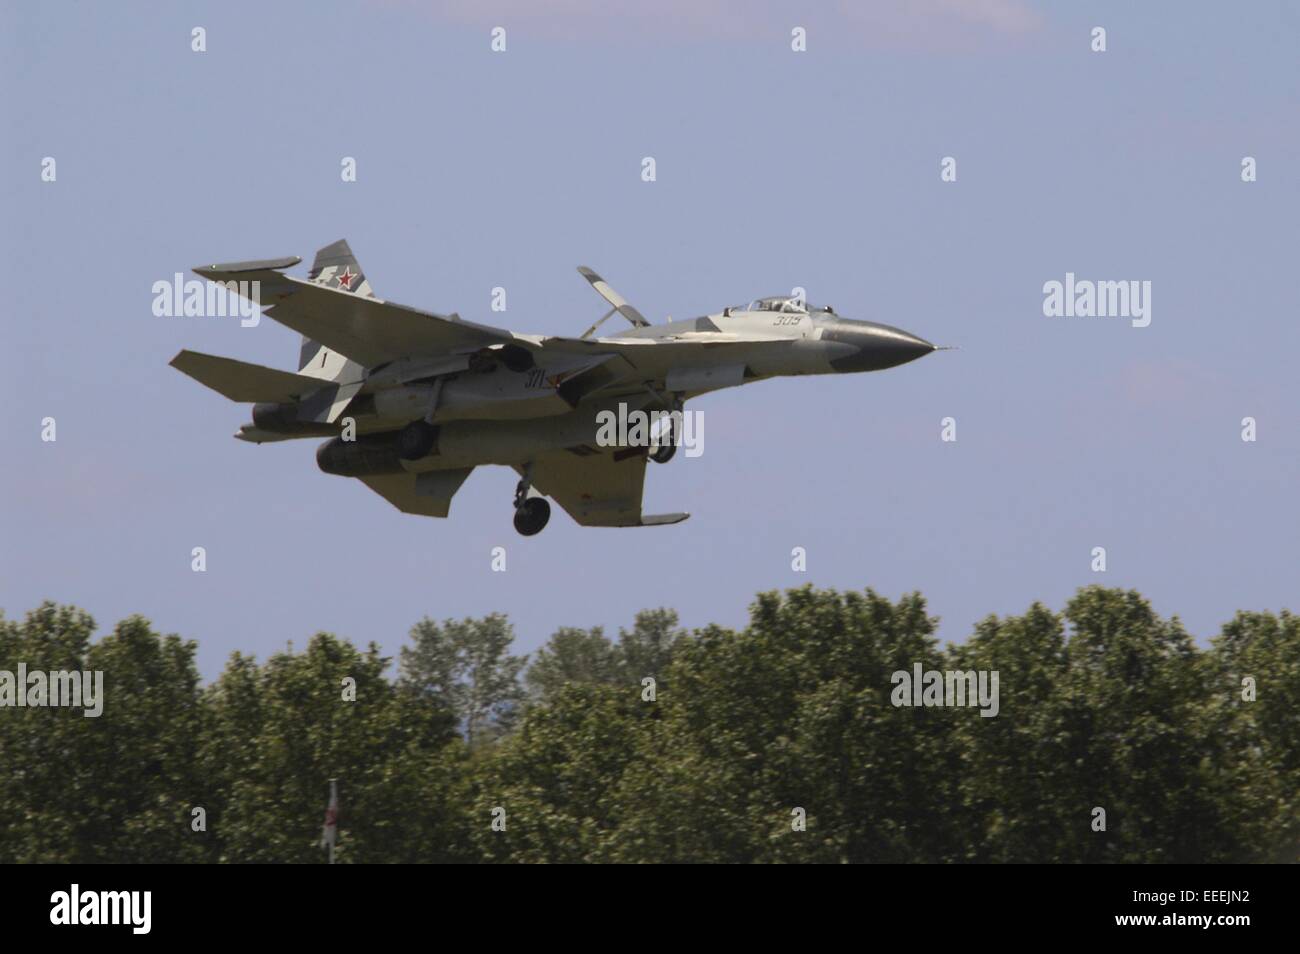 Russian fighter aircraft Sukhoi Su-27 SMK 'Flanker' Stock Photo